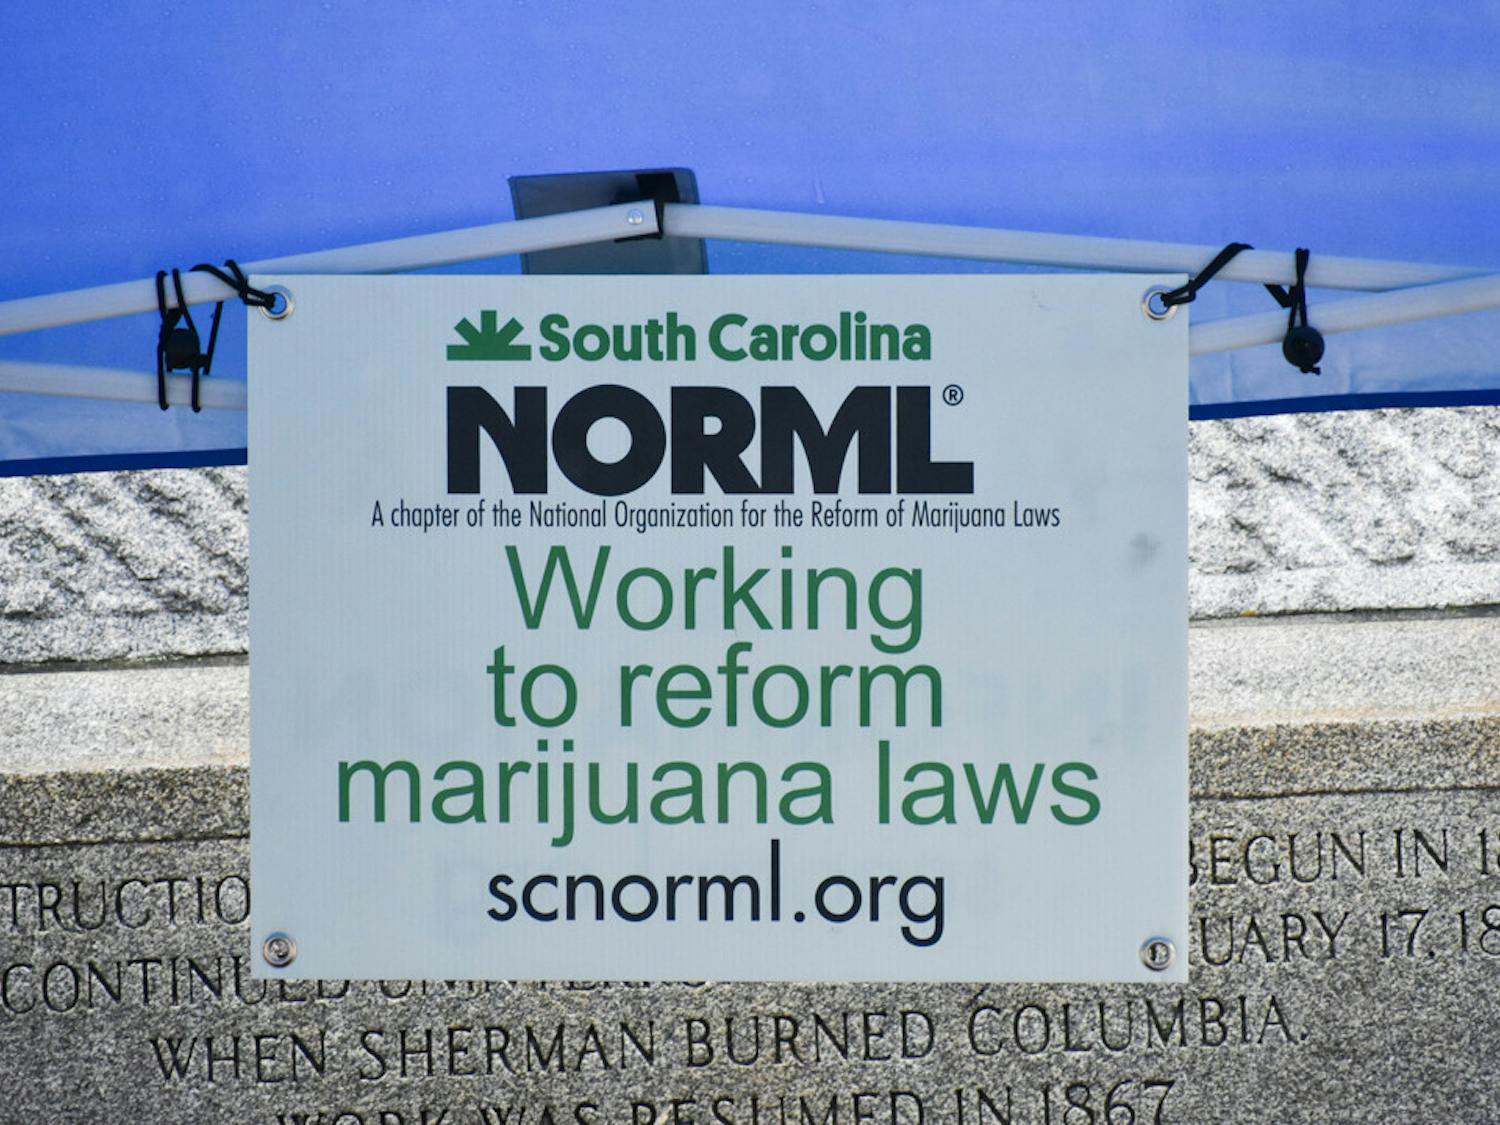 South Carolina NORML works to reform the laws against the use of marijuana in the state. Having access to safe marijuana is another goal of the organization.